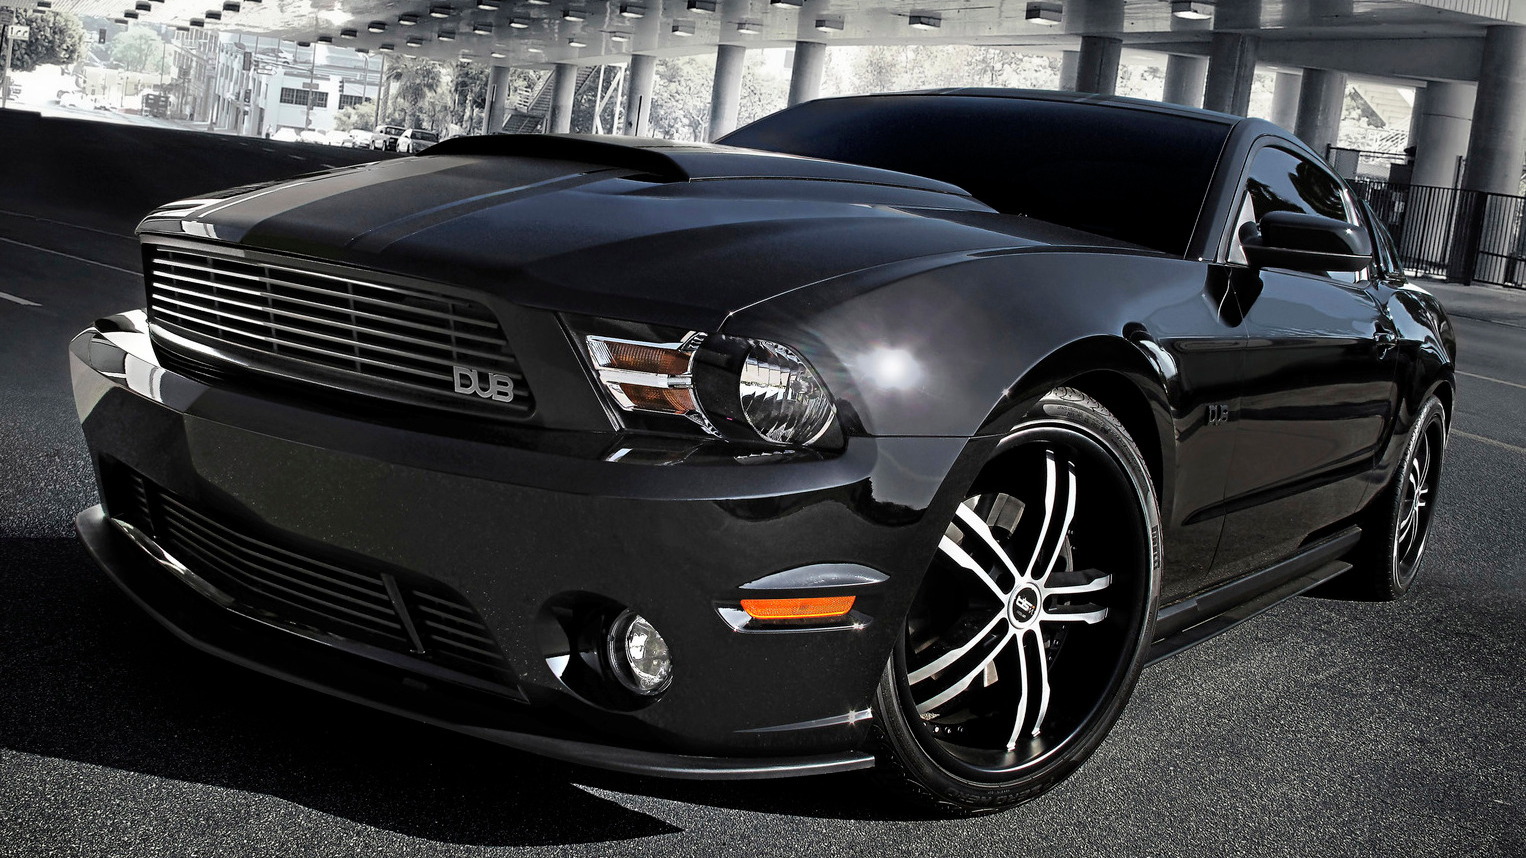 DUB Edition 2011 Ford Mustang